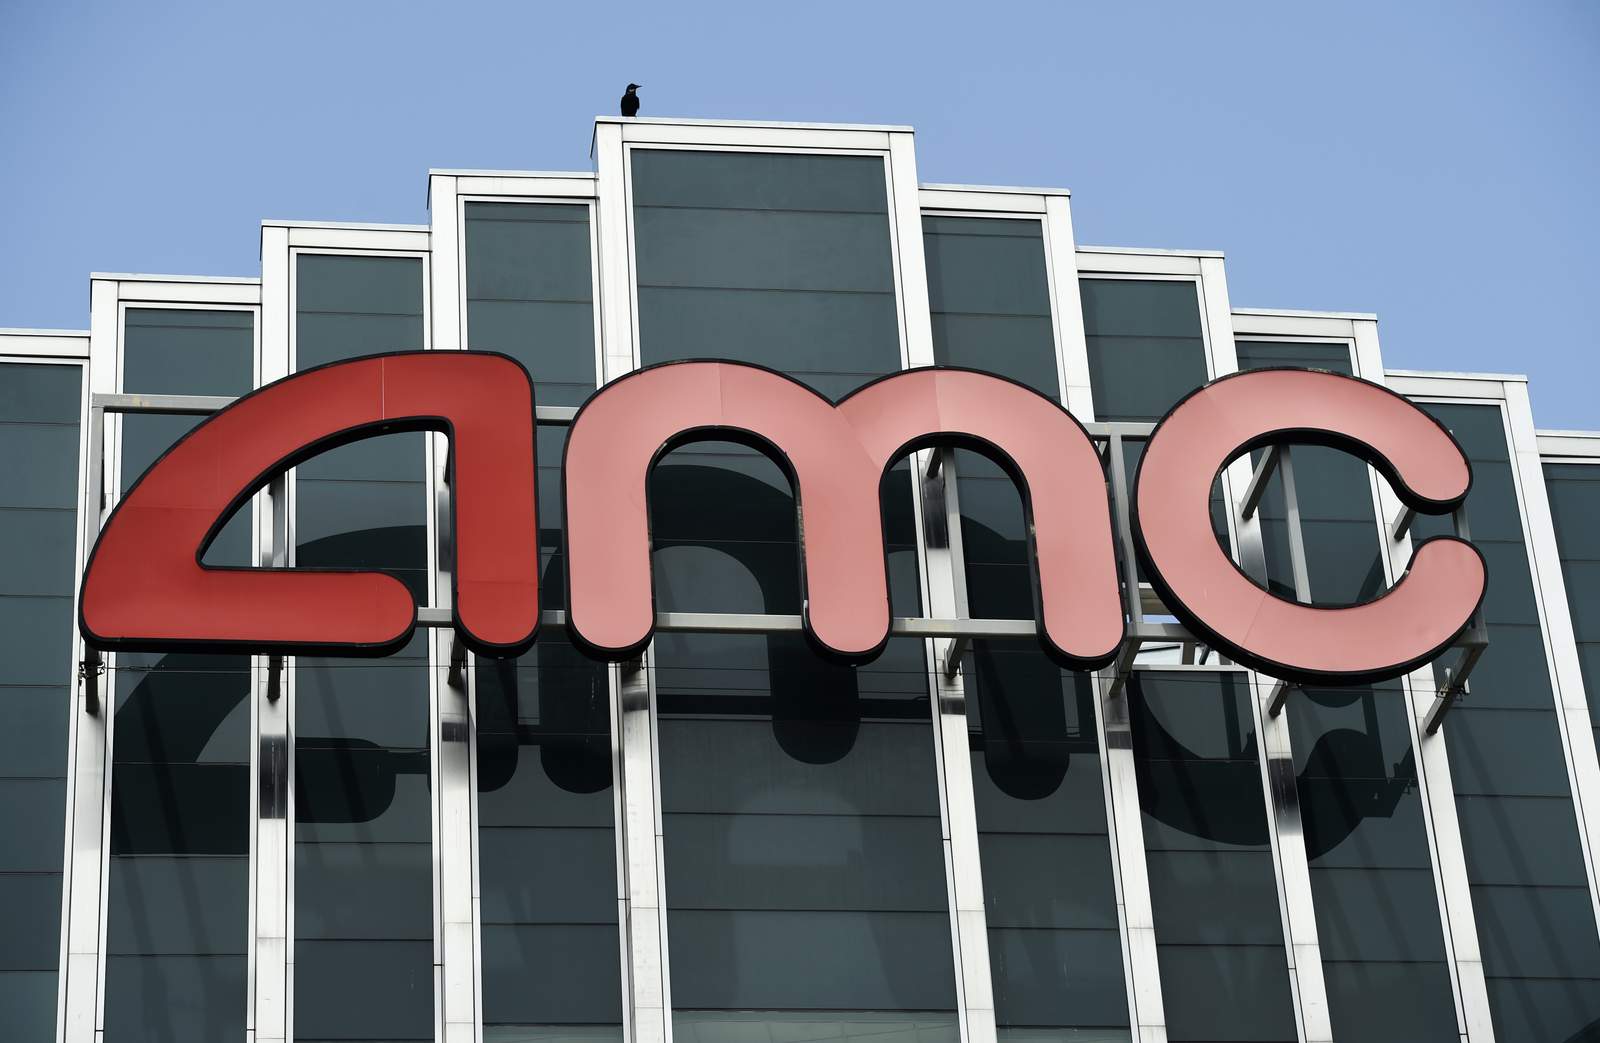 AMC to offer 15-cent tickets on first day of reopening